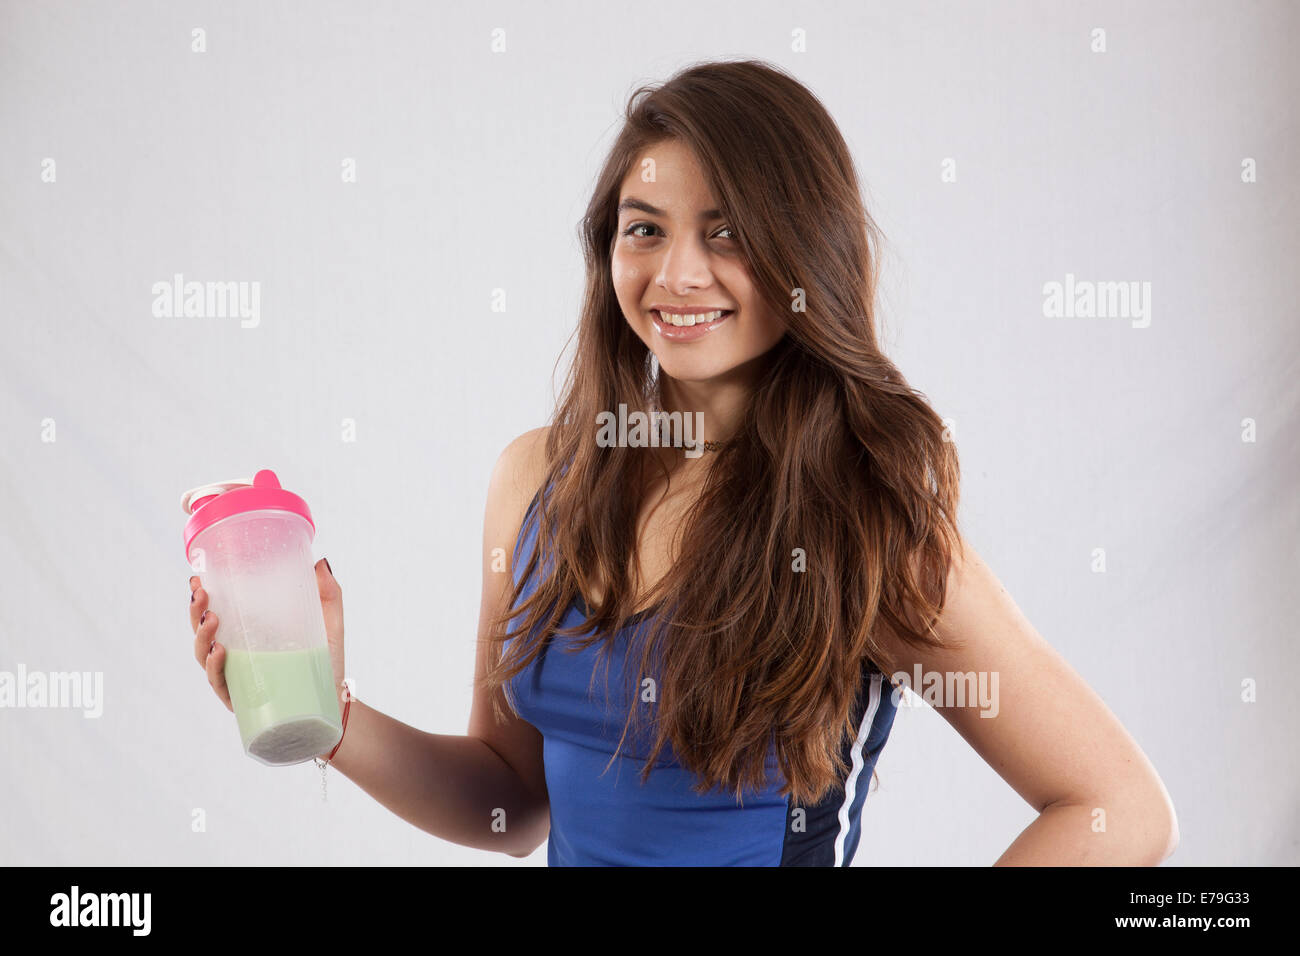 Pretty Caucasian woman with a shake bottle, smiling at the camera Stock Photo